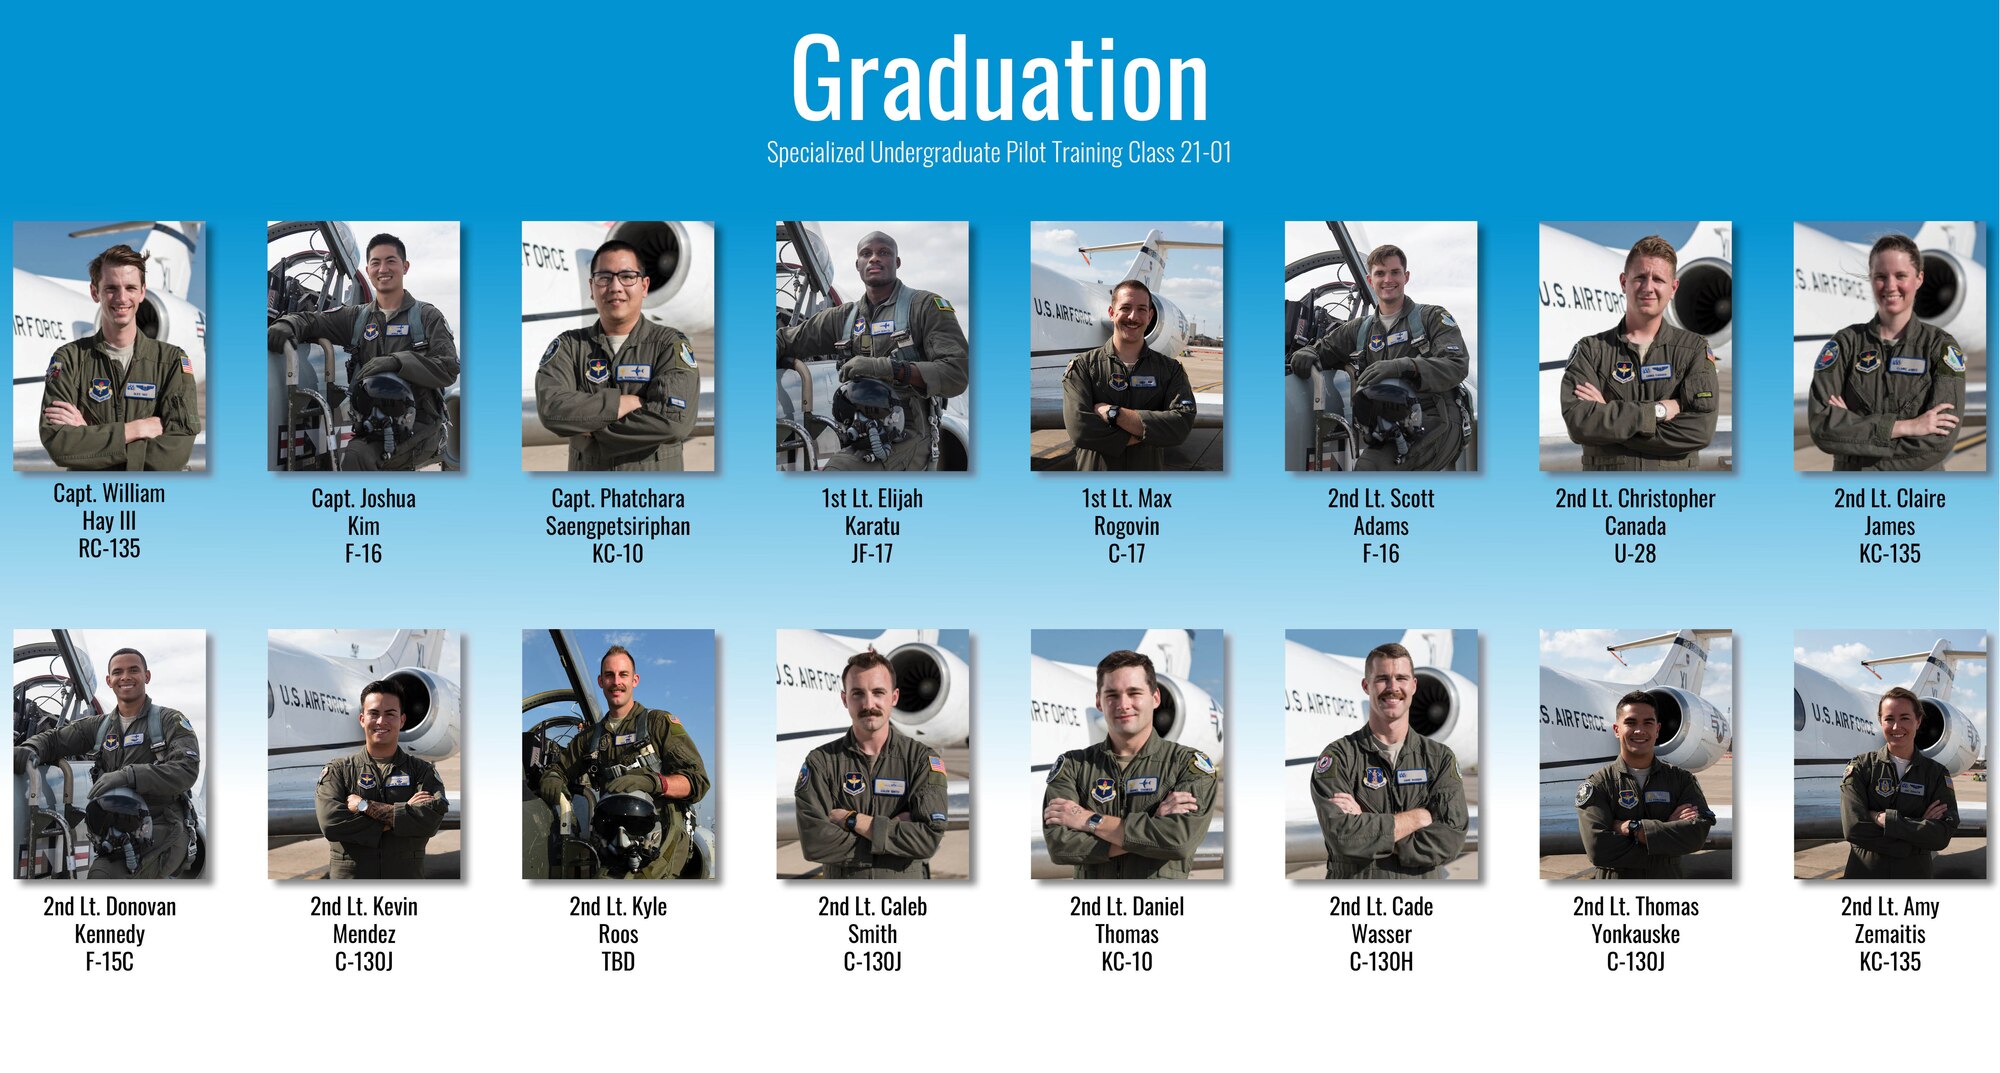 Specialized Undergraduate Pilot Training class 21-01 graduated after 52 weeks of training at Laughlin Air Force Base, Texas, Oct. 23, 2020. Laughlin is the home of the 47th Flying Training Wing, whose mission is to build combat-ready Airmen, leaders and pilots. (U.S. Air Force graphic by Airman 1st Class David Phaff)